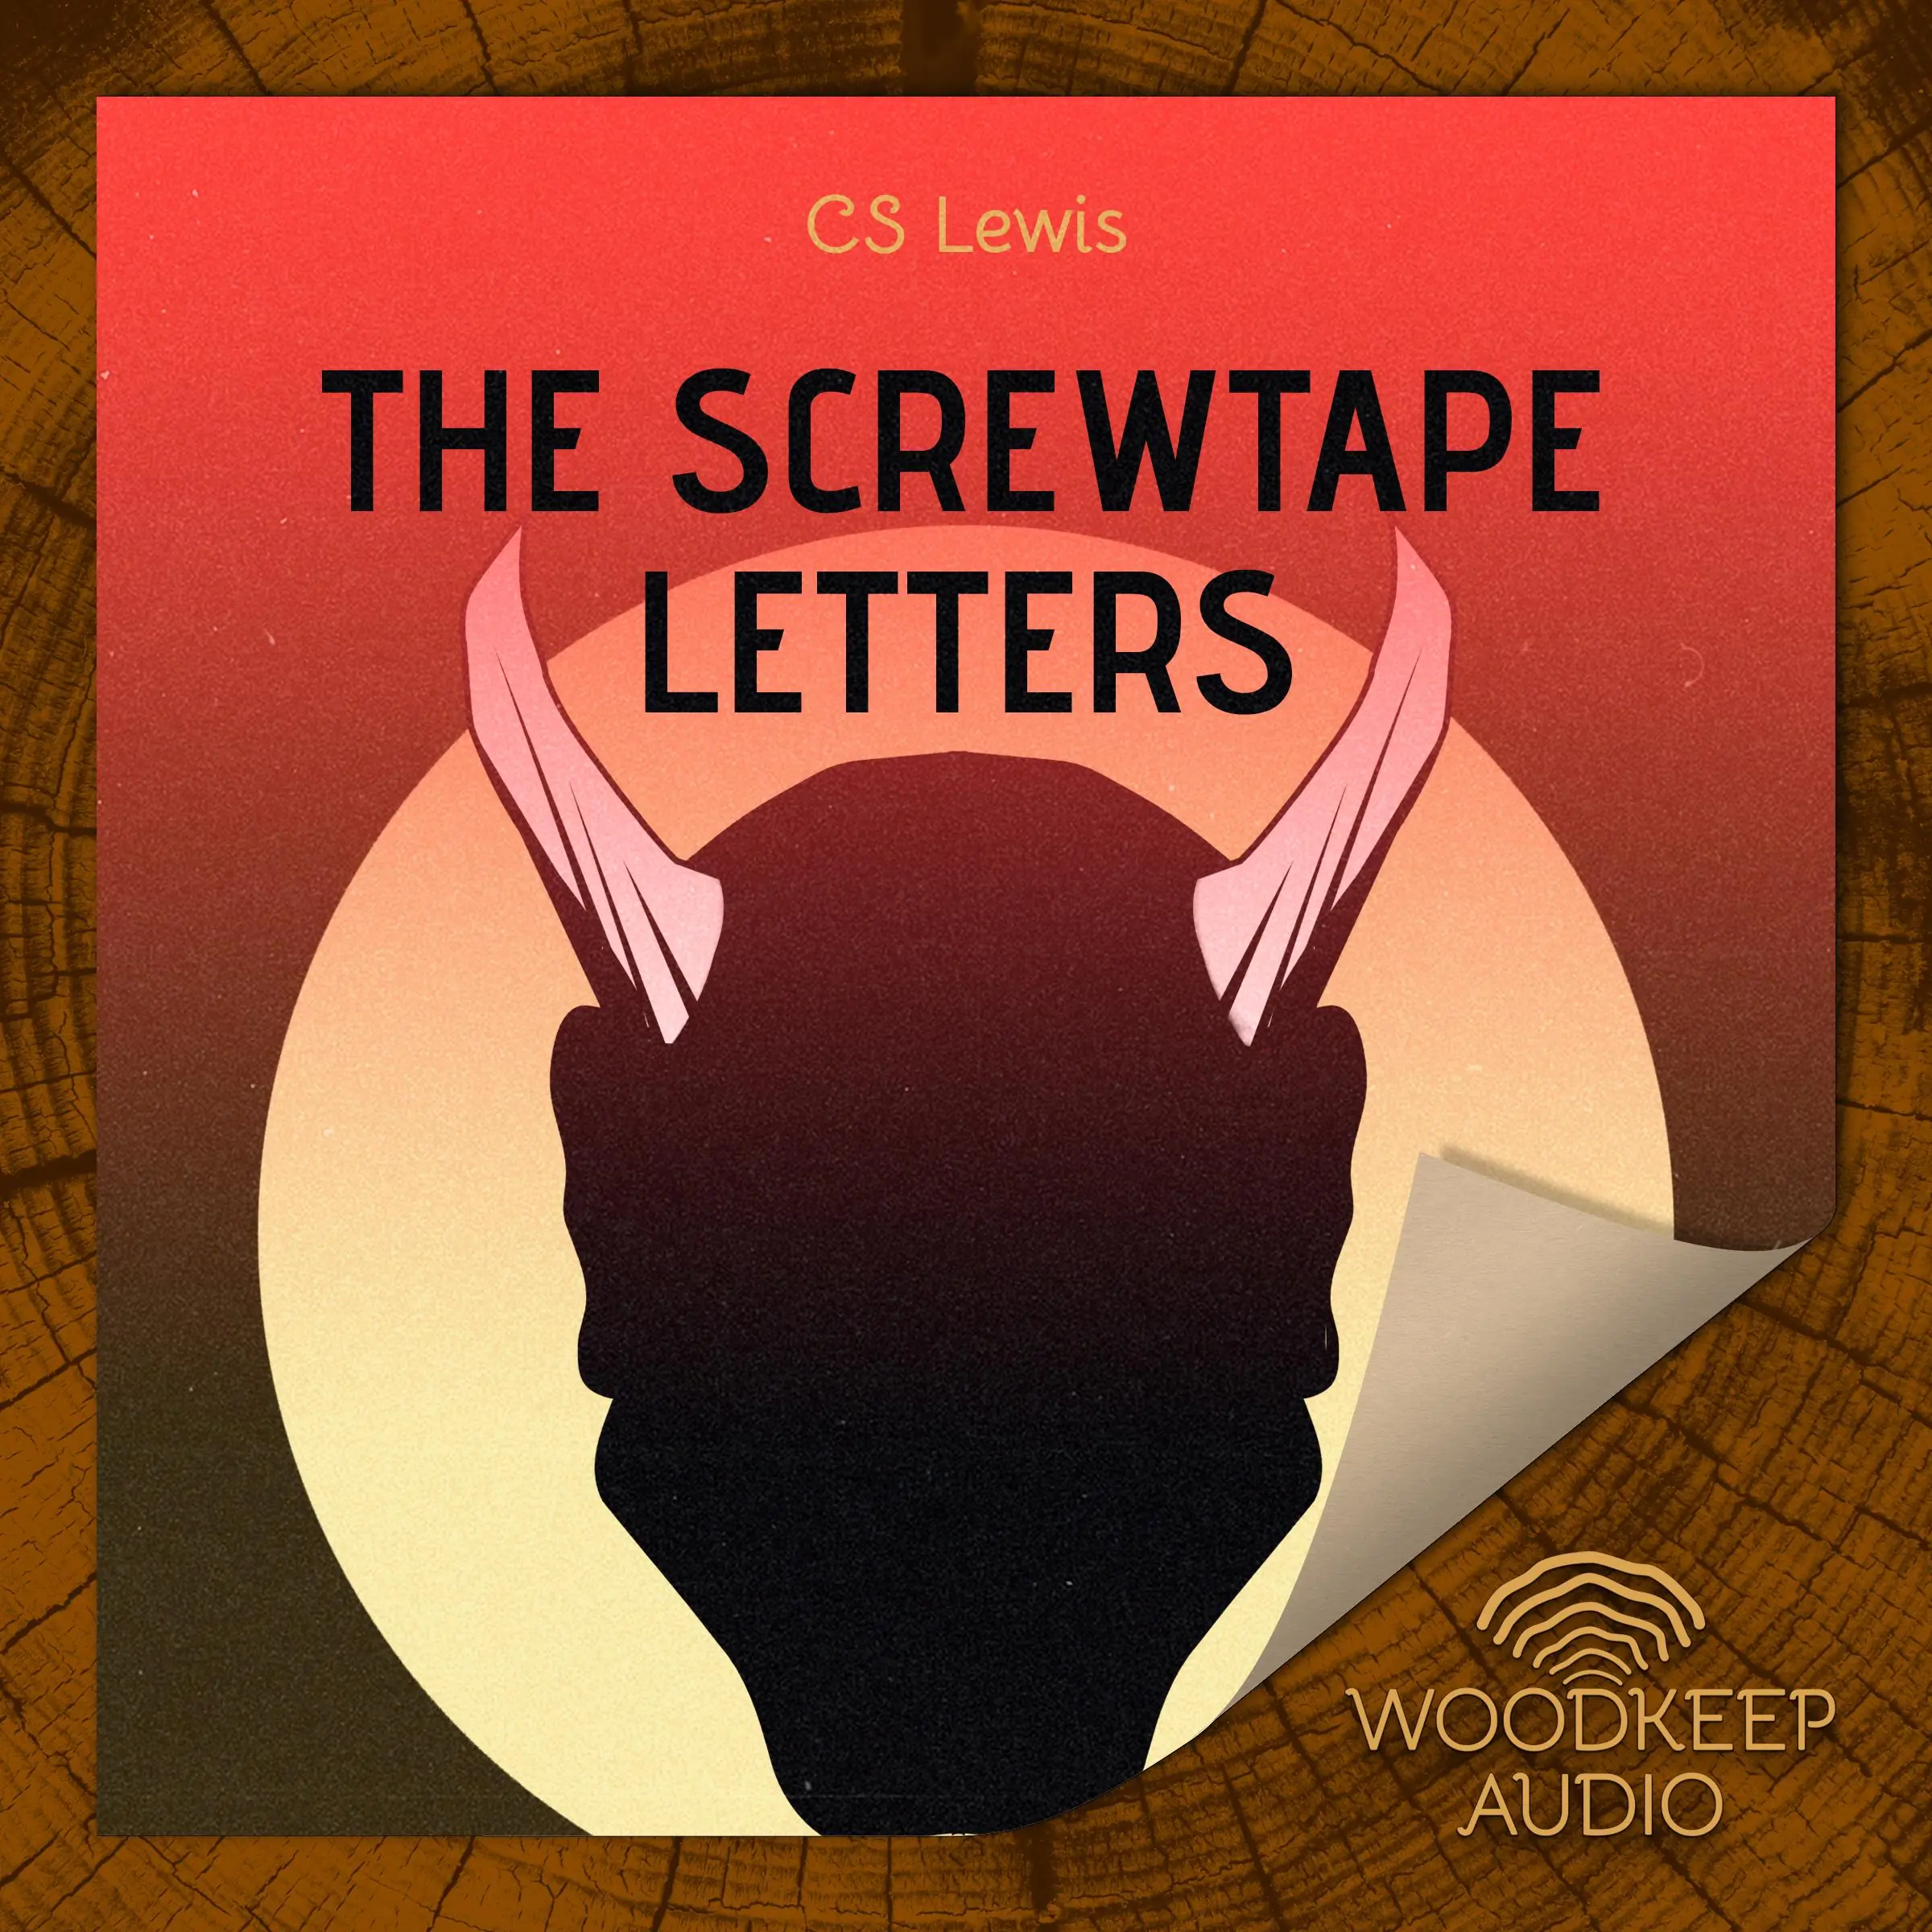 The Screwtape Letters by C.S. Lewis Audiobook